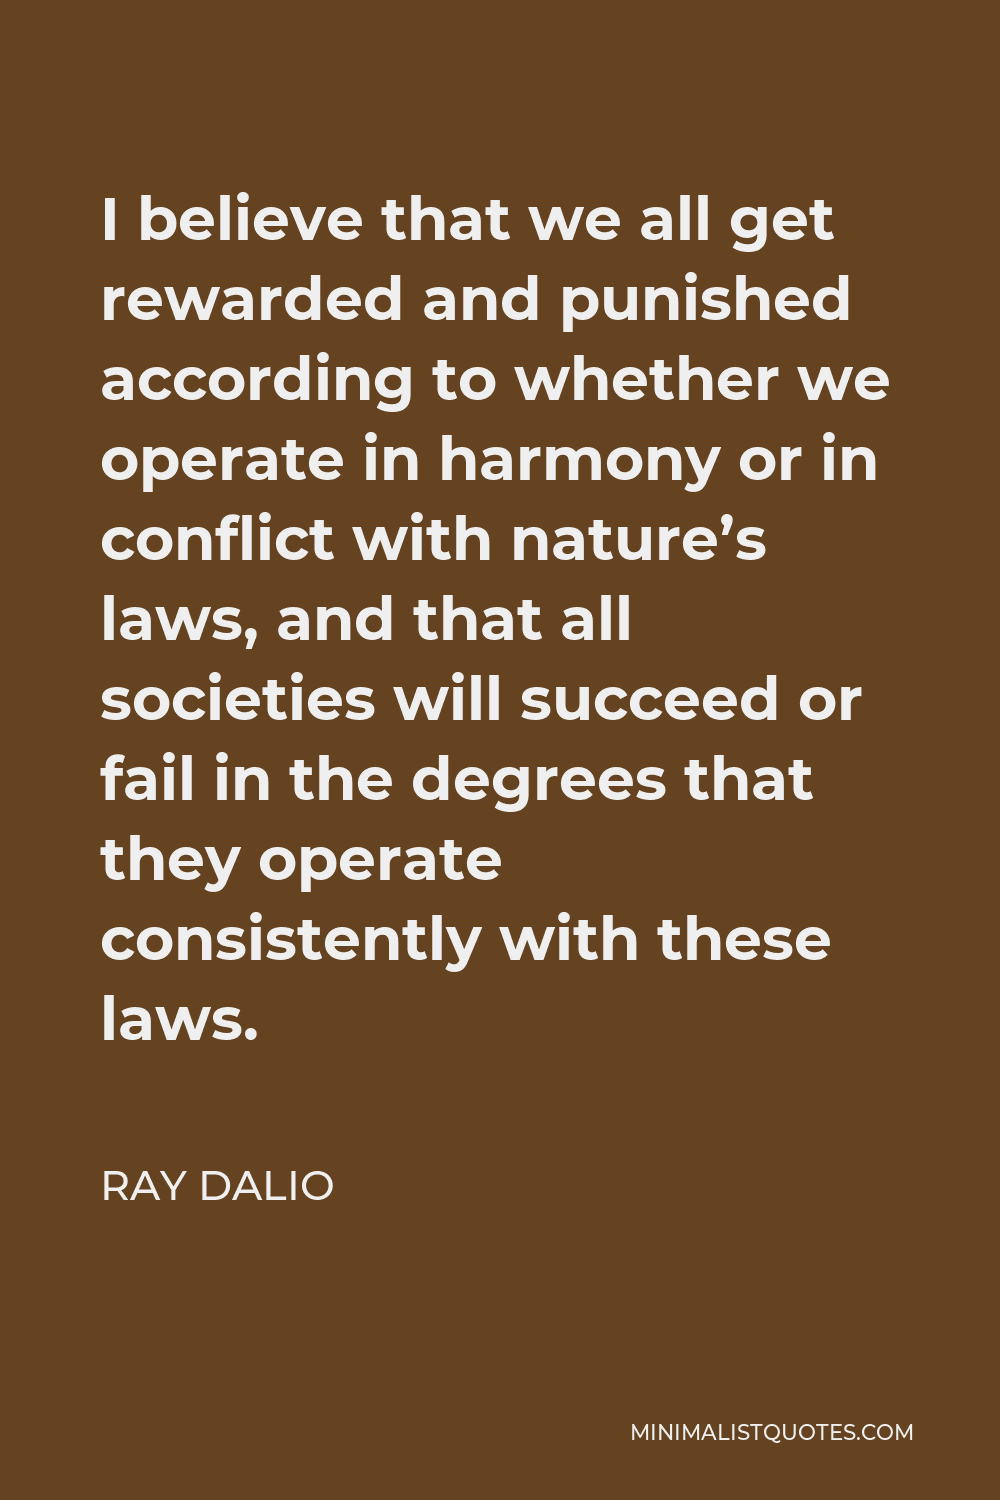 Ray Dalio Quote - I believe that we all get rewarded and punished according to whether we operate in harmony or in conflict with nature’s laws, and that all societies will succeed or fail in the degrees that they operate consistently with these laws.